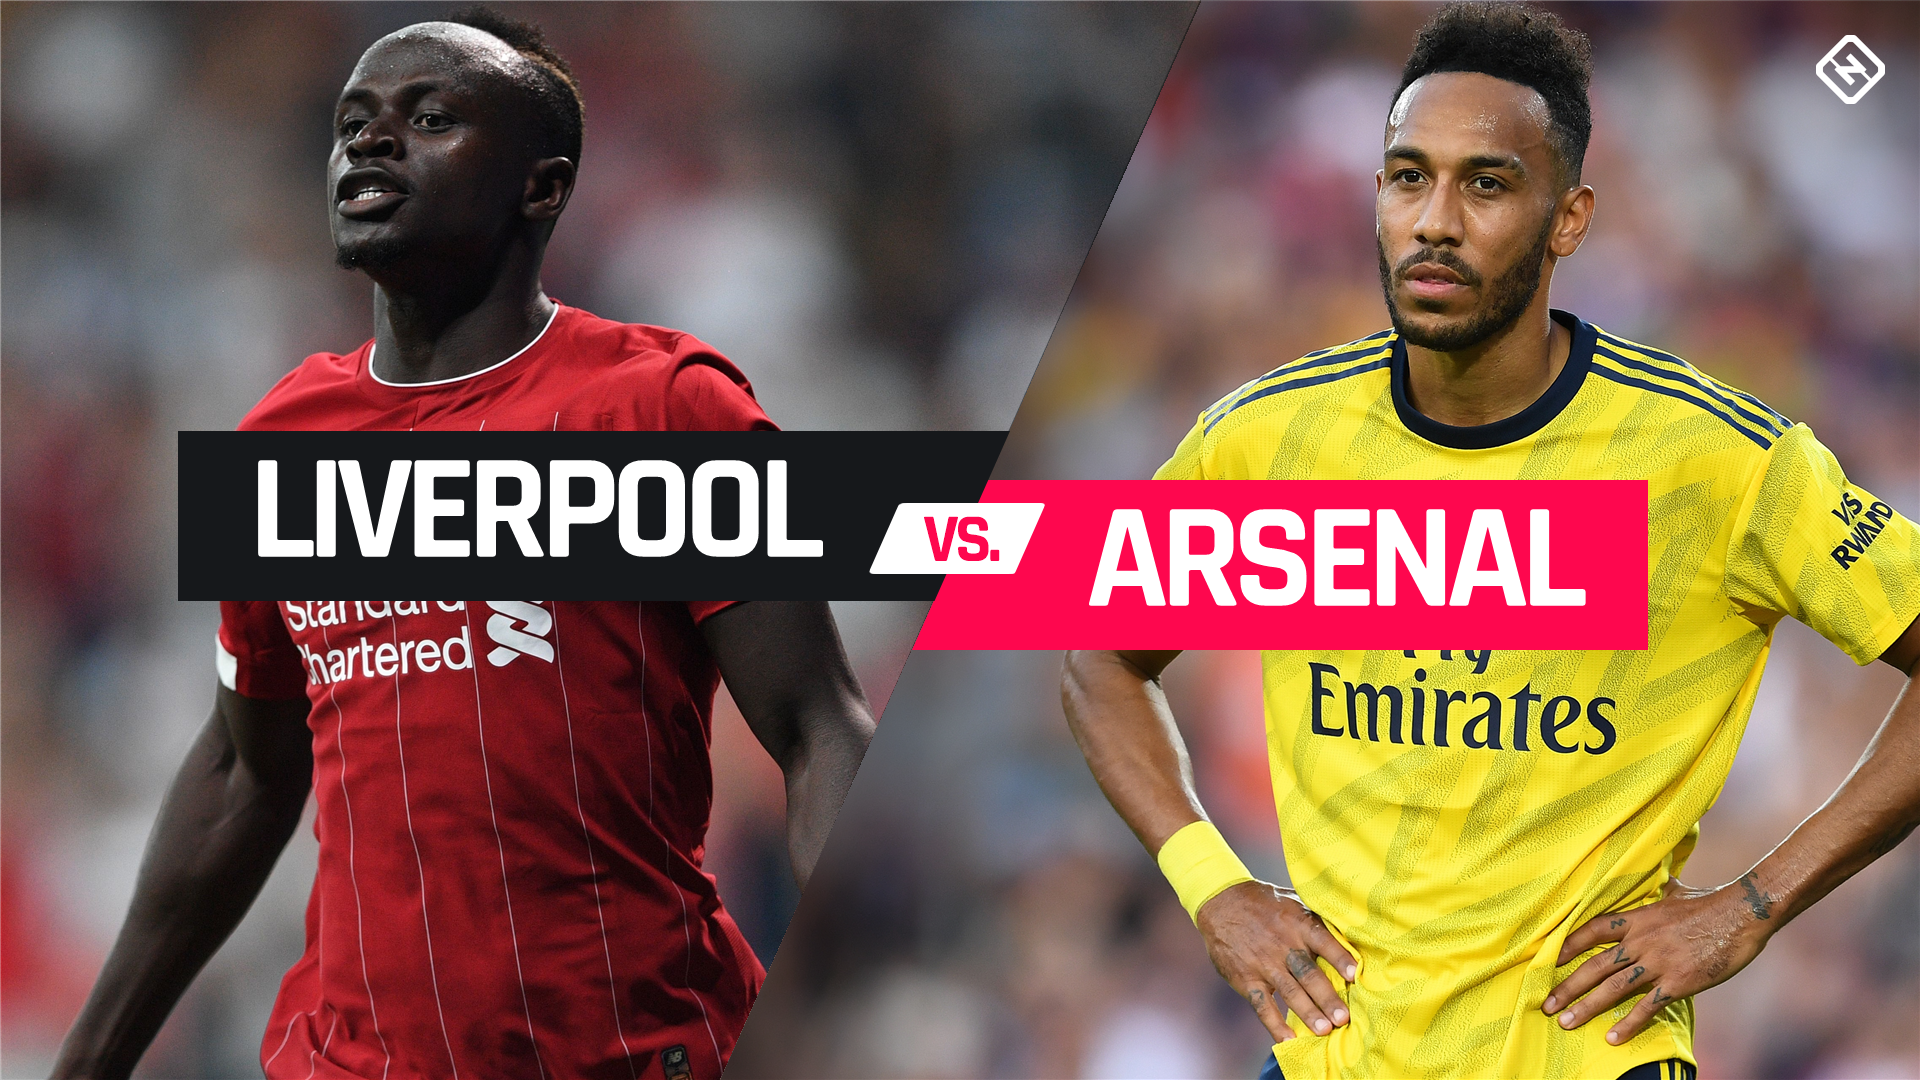 Liverpool vs. Arsenal: How to watch the Premier League match in Canada